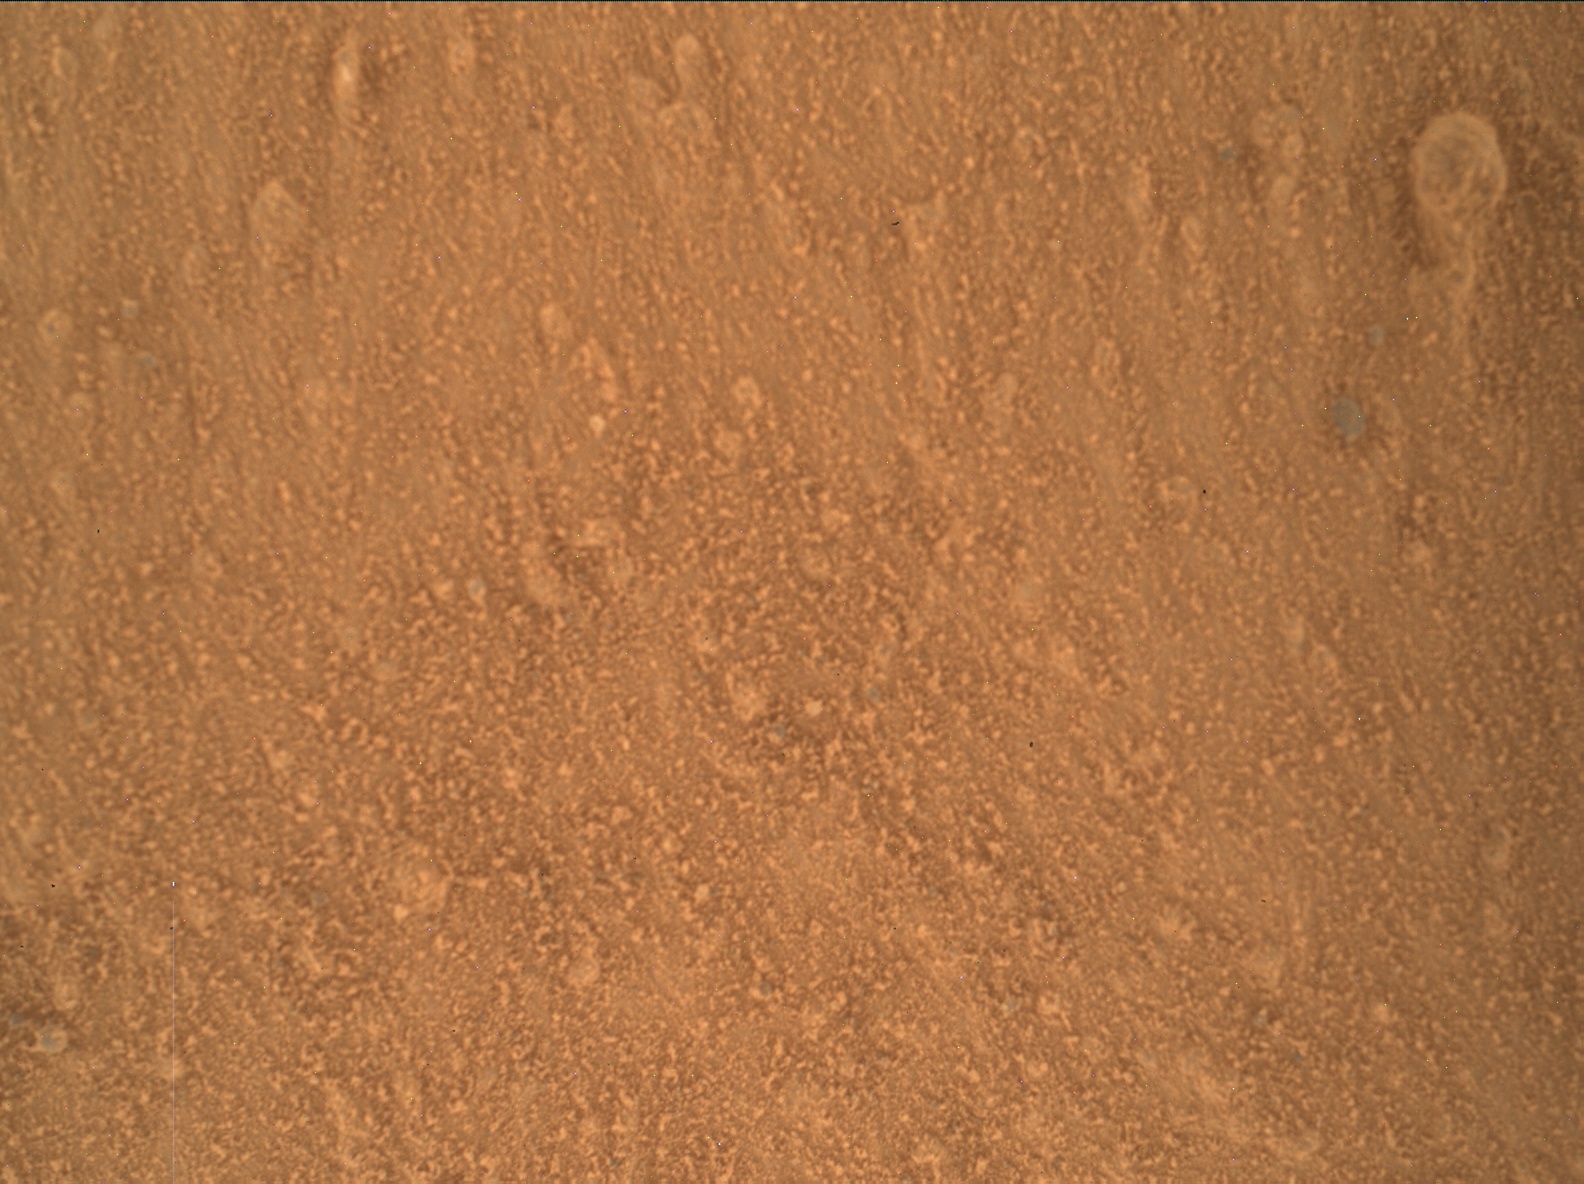 Nasa's Mars rover Curiosity acquired this image using its Mars Hand Lens Imager (MAHLI) on Sol 3319